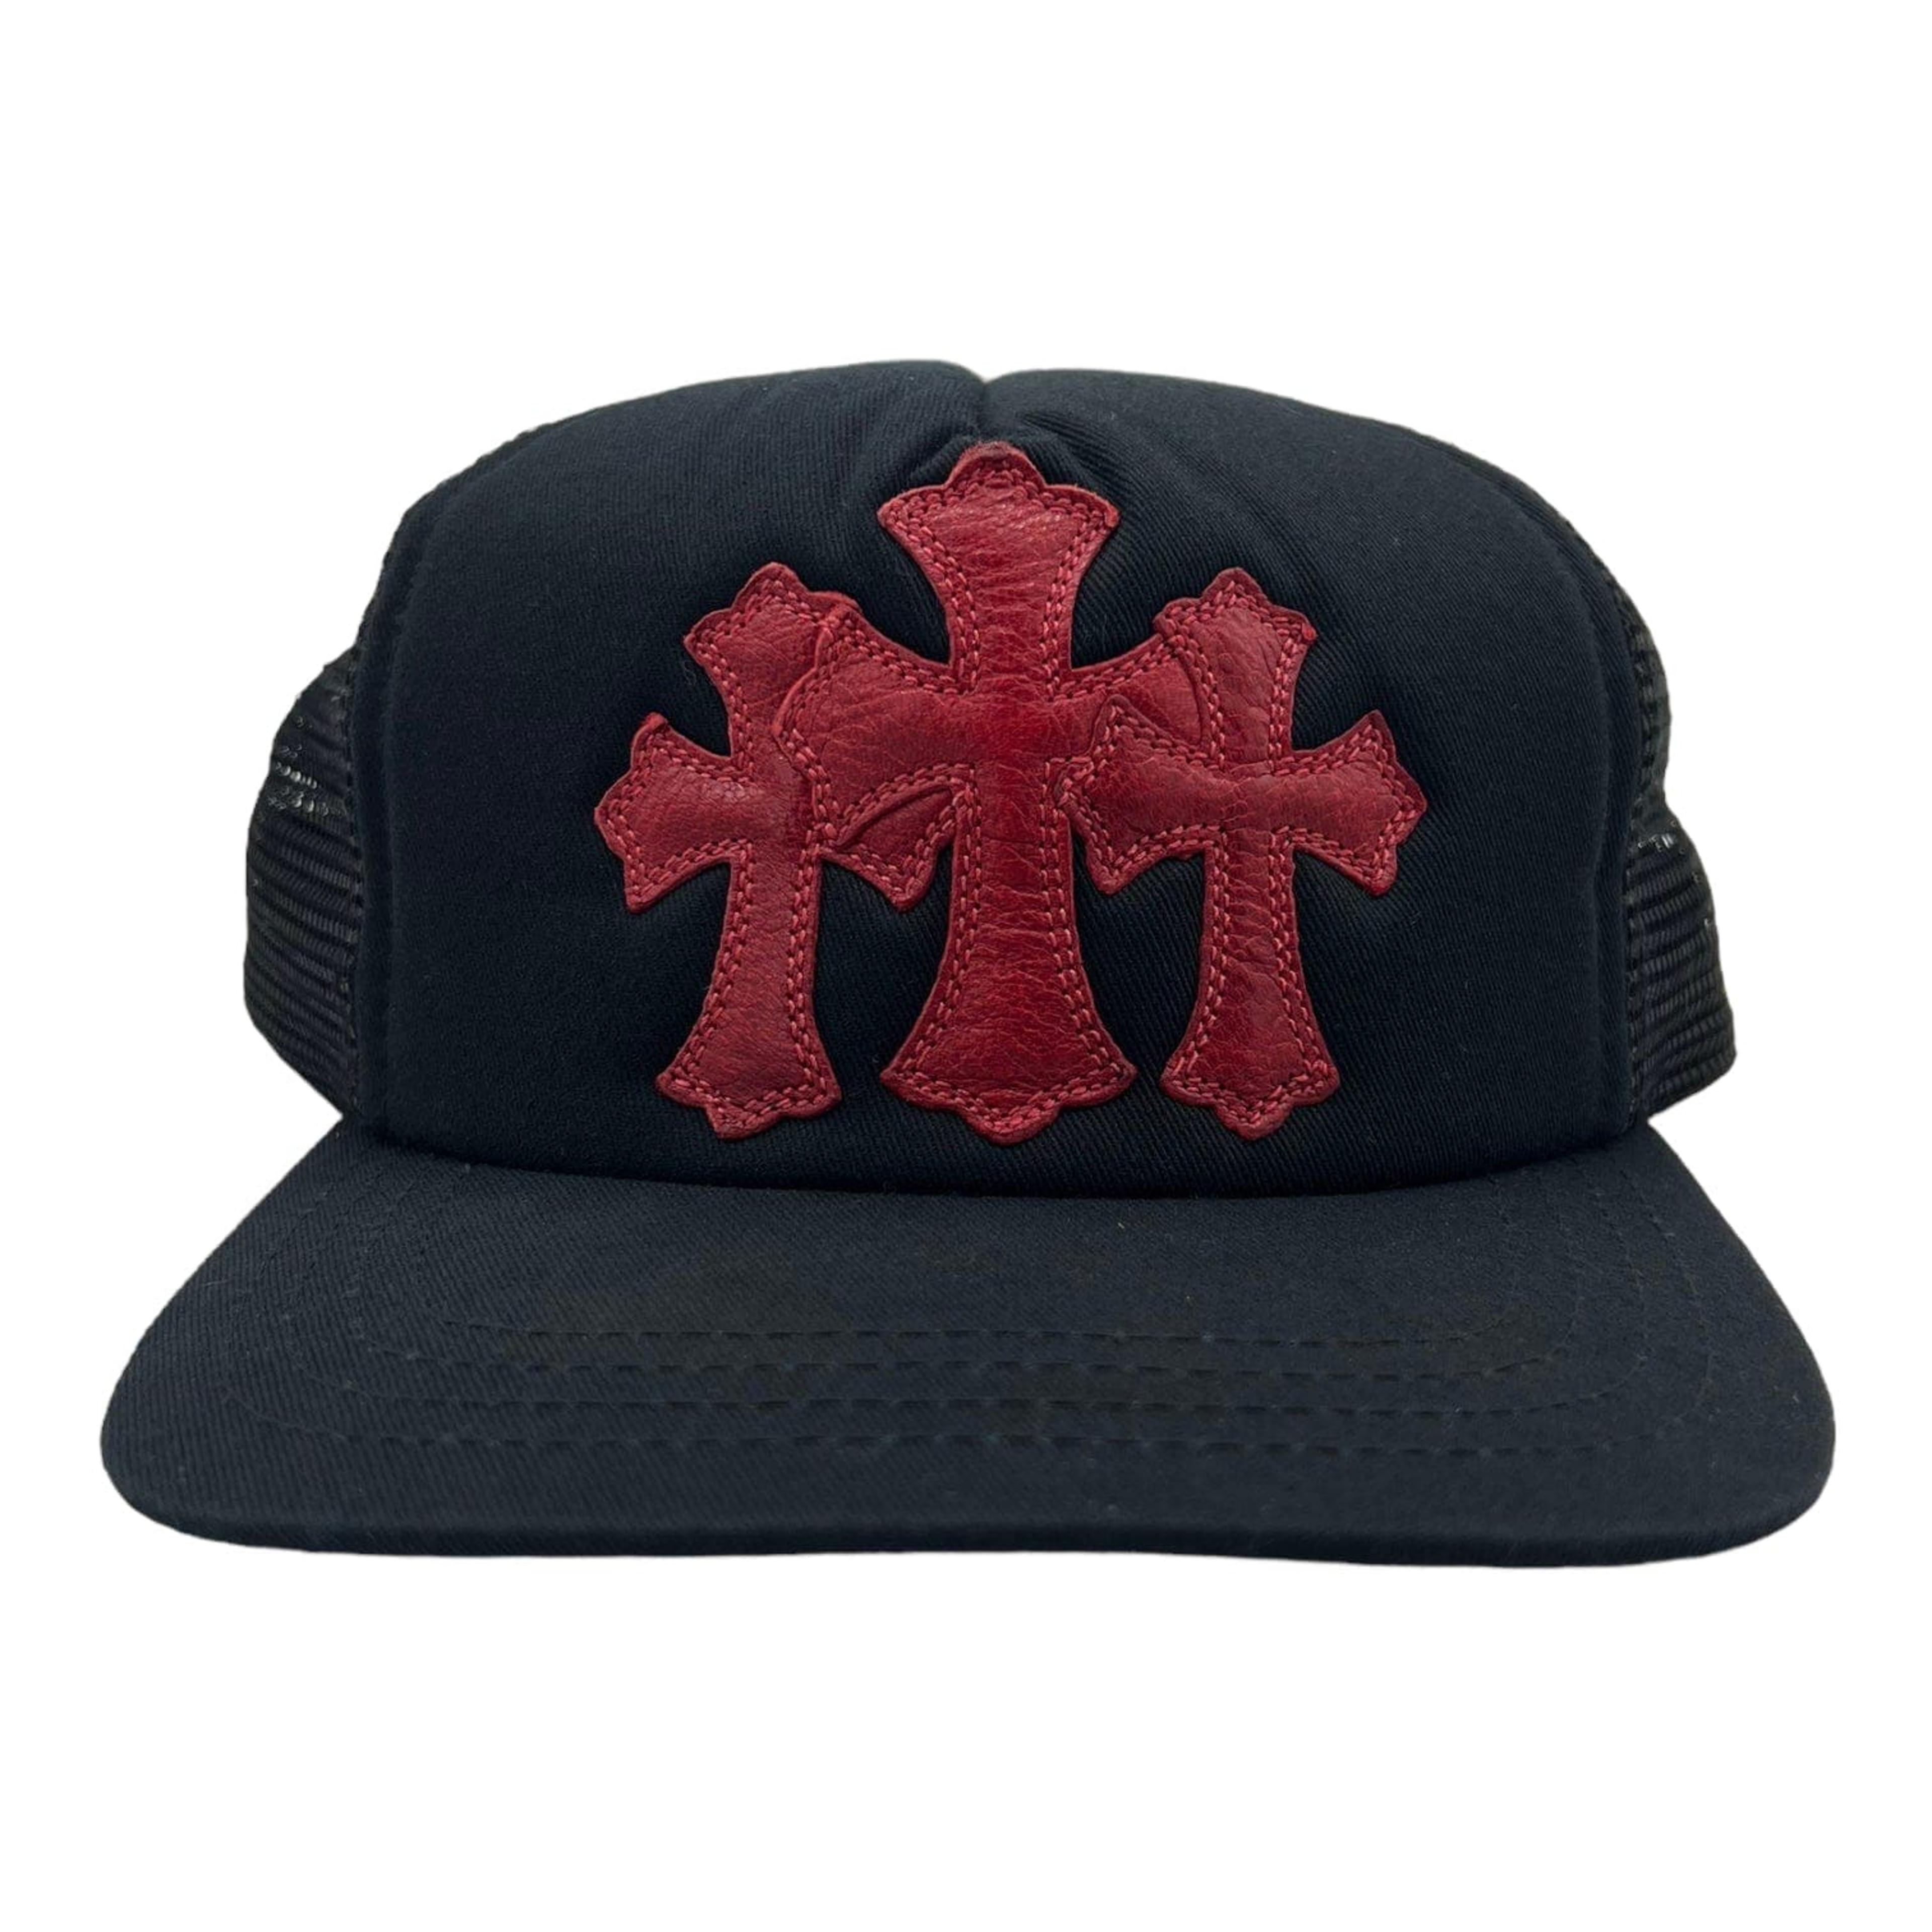 Chrome Hearts Cemetery Trucker Hat Black Red Pre-Owned